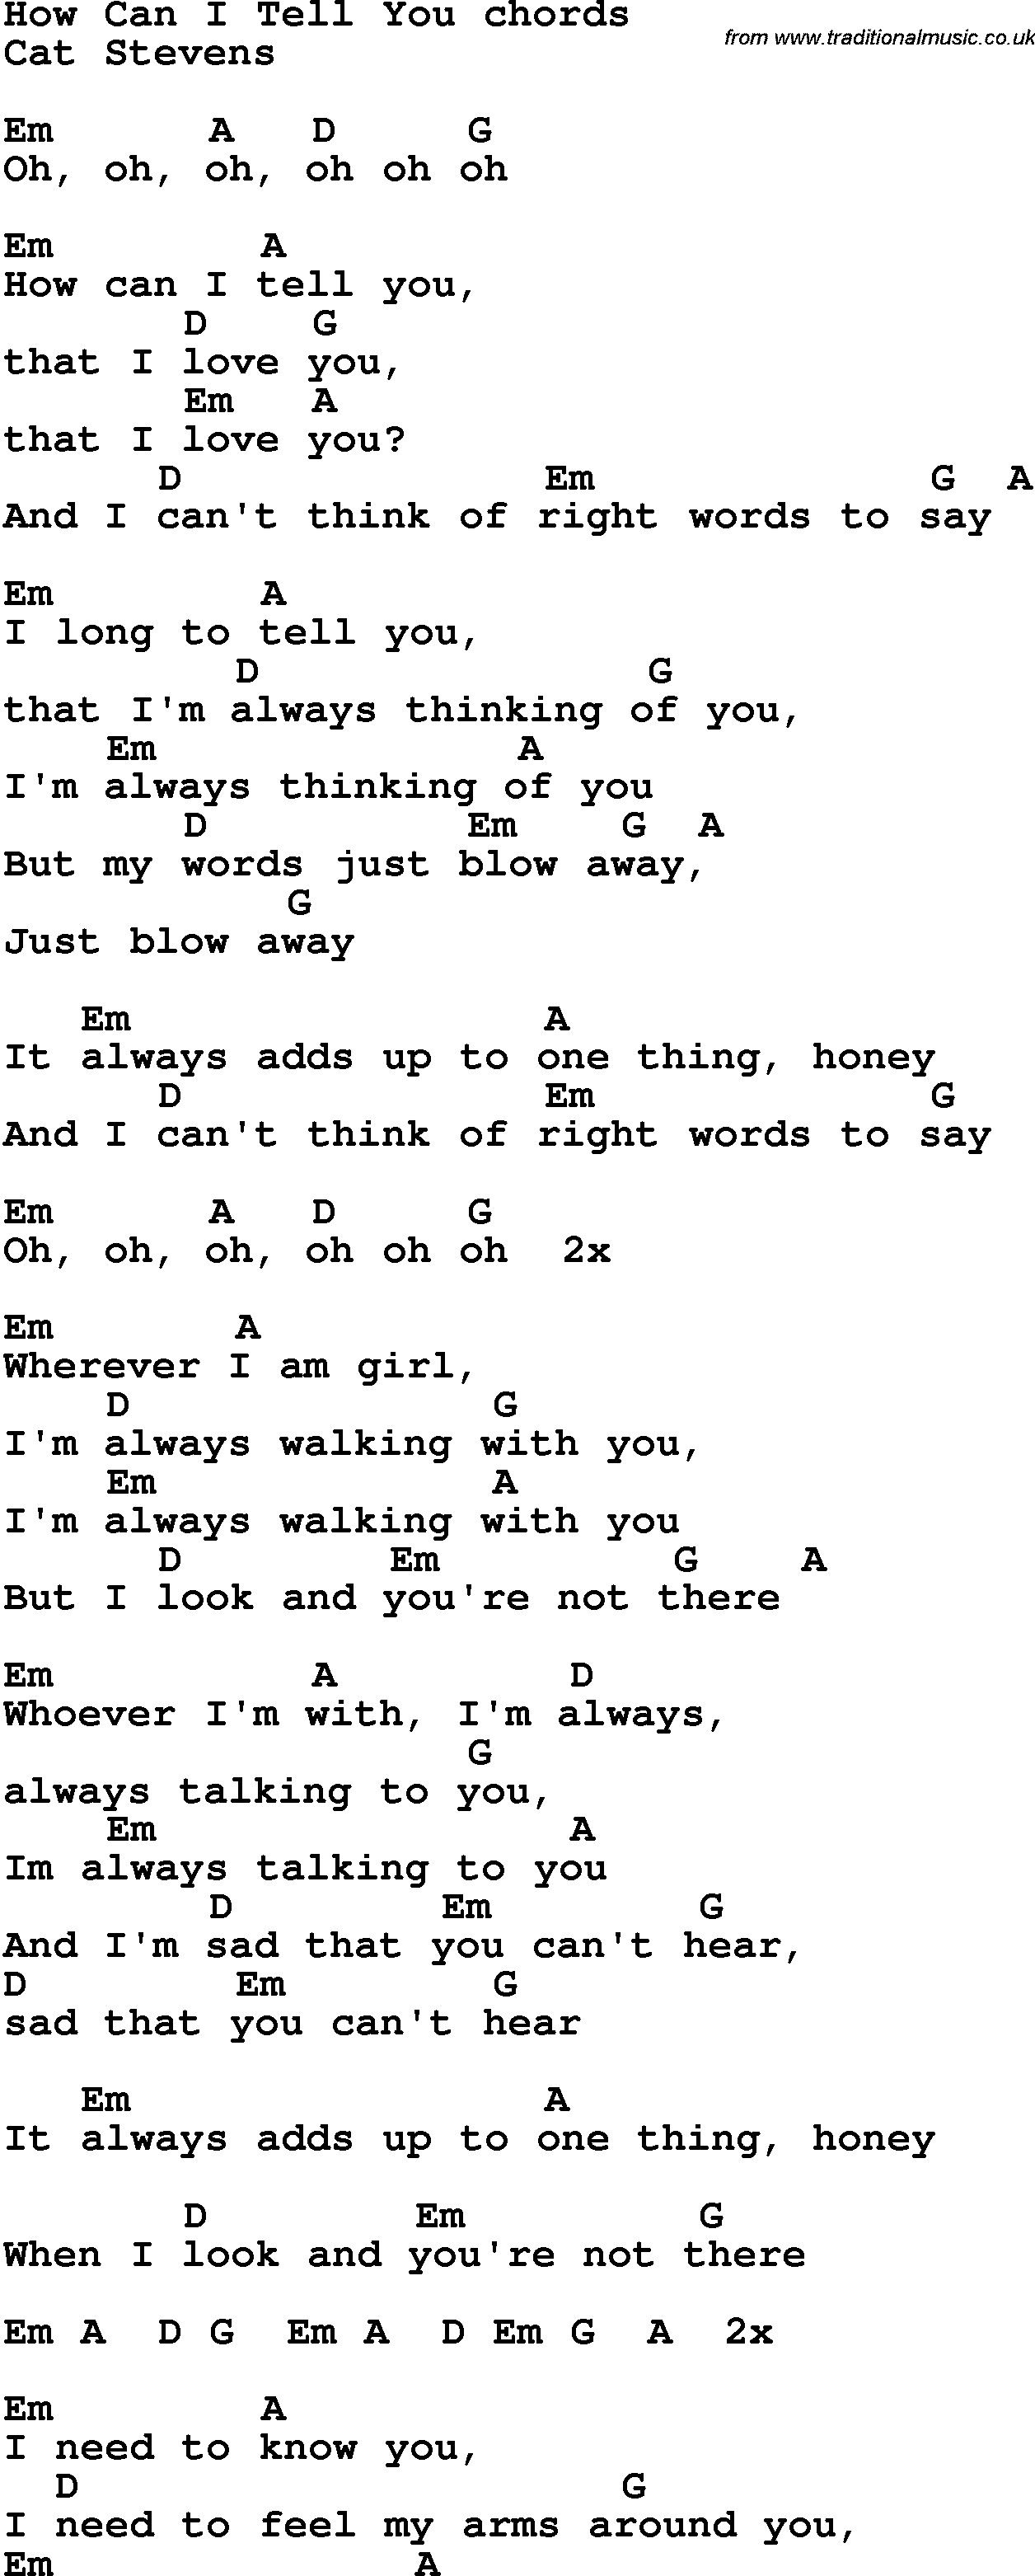 Song Lyrics with guitar chords for How Can I Tell You